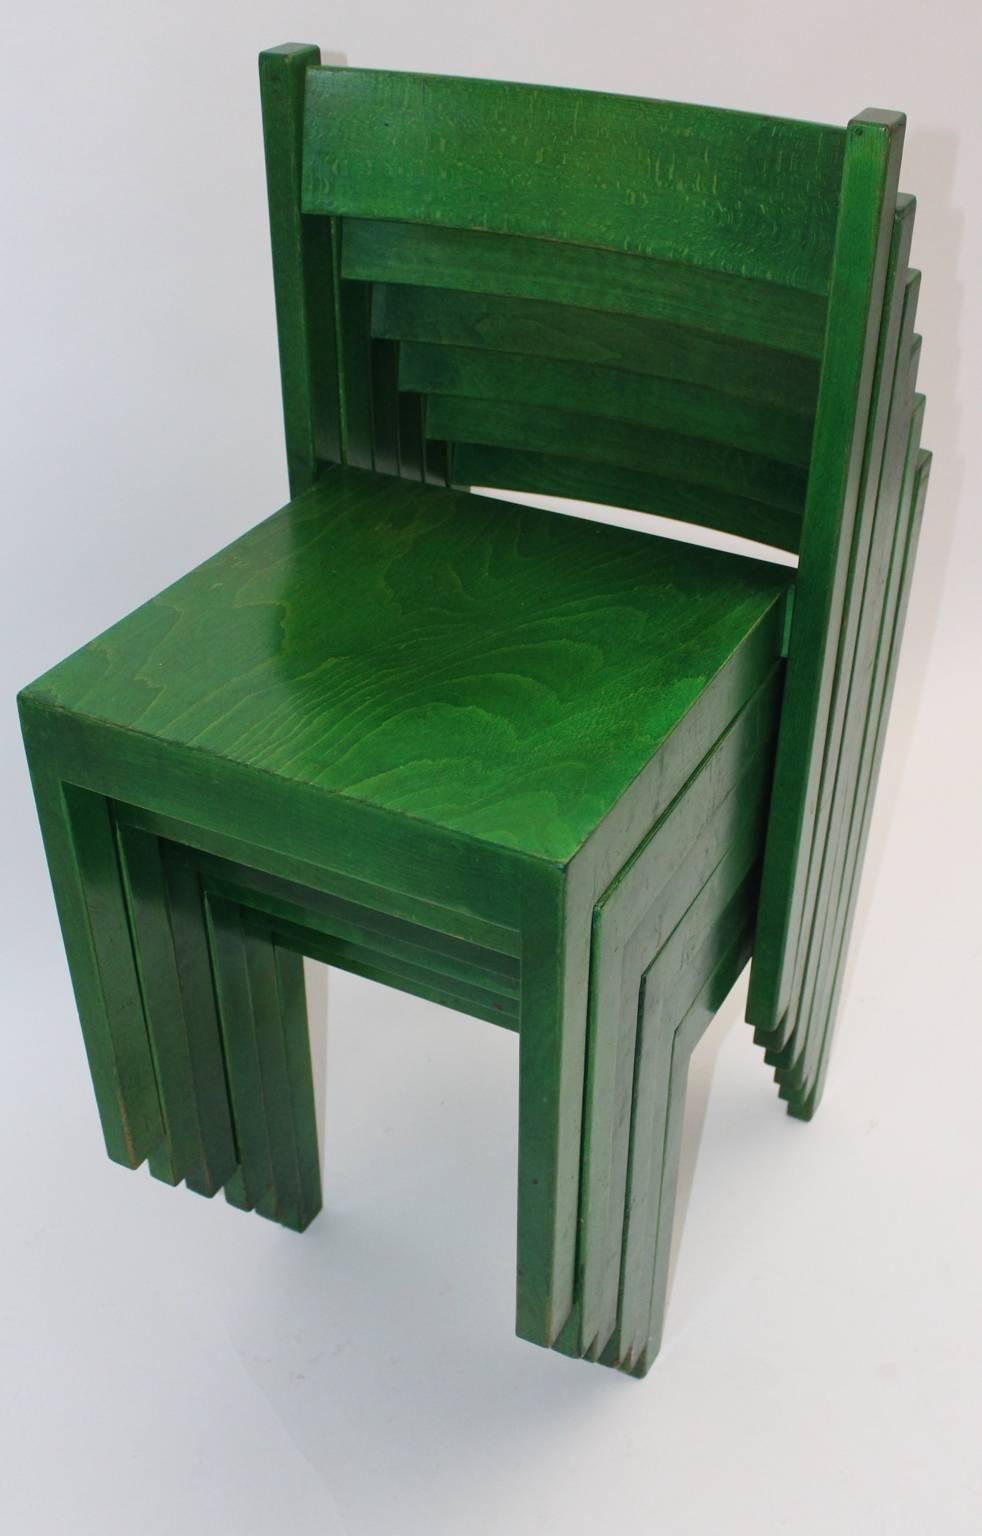 Awesome in a simple and timeless design.
Designed by Carl Auböck.
Executed by E. & A. Pollak.

Made of green lacquered beechwood and plywood, a color point for your home.
Stackable

Documented
 
